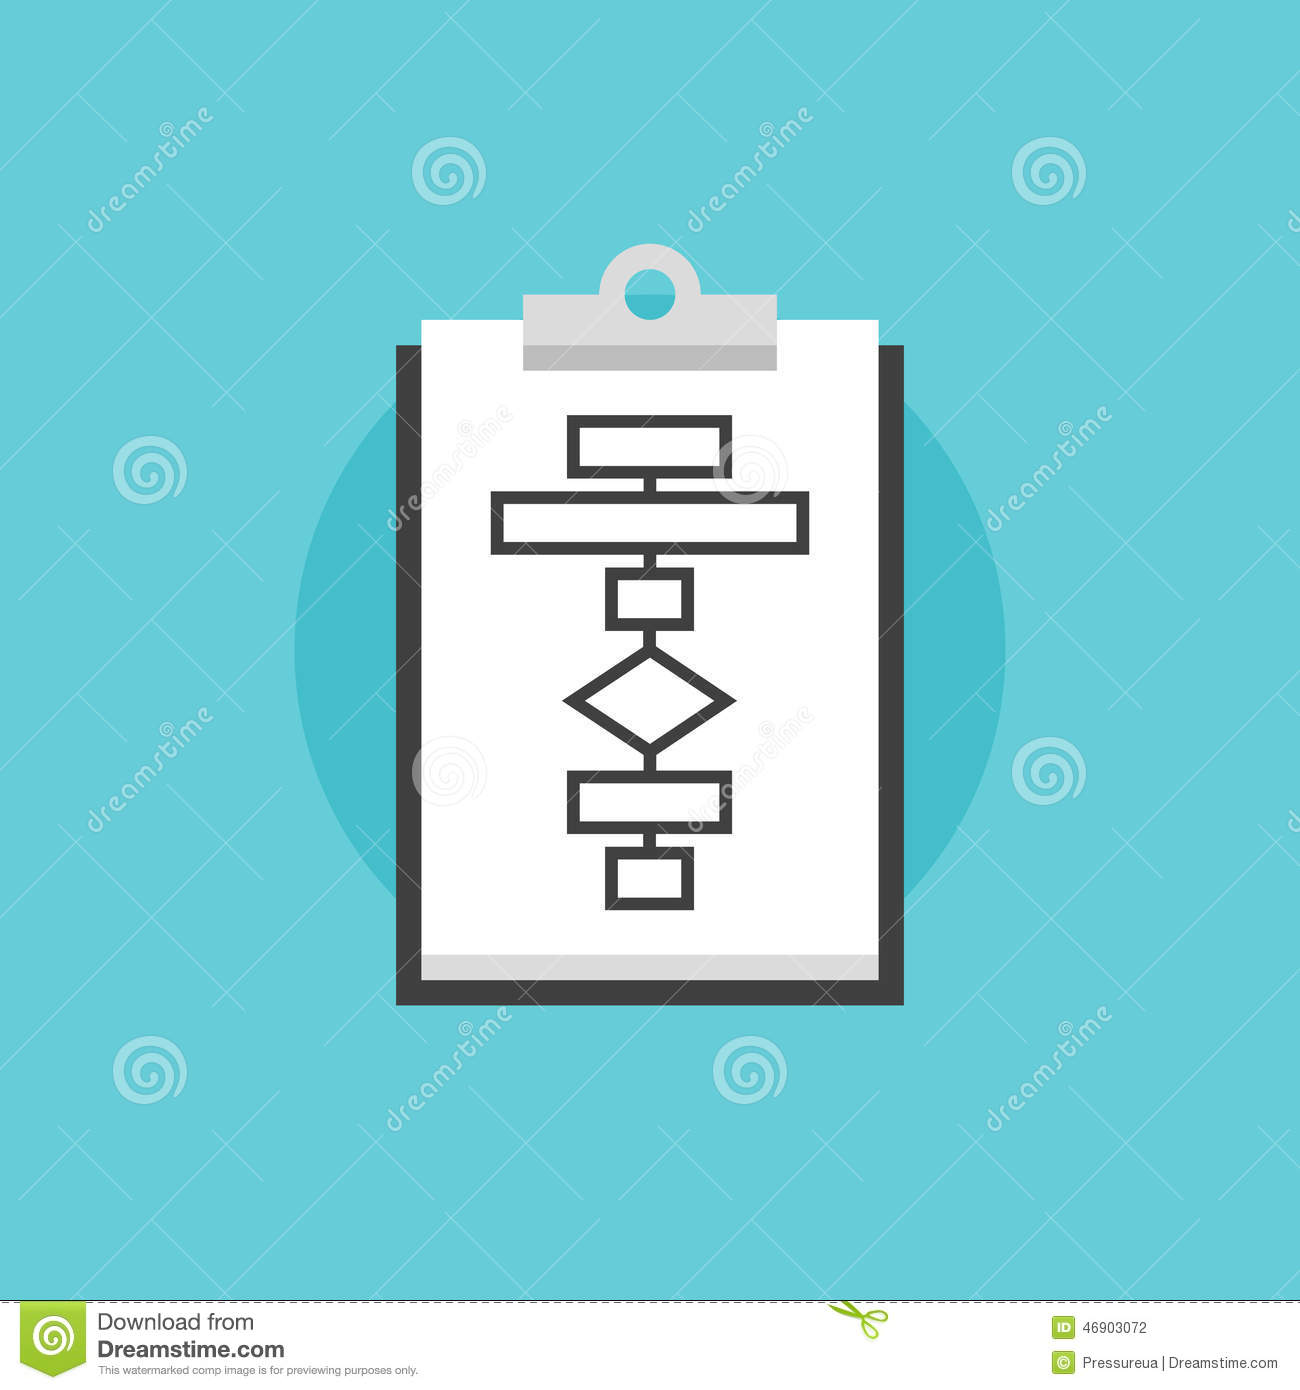 Business Process Icon Vector